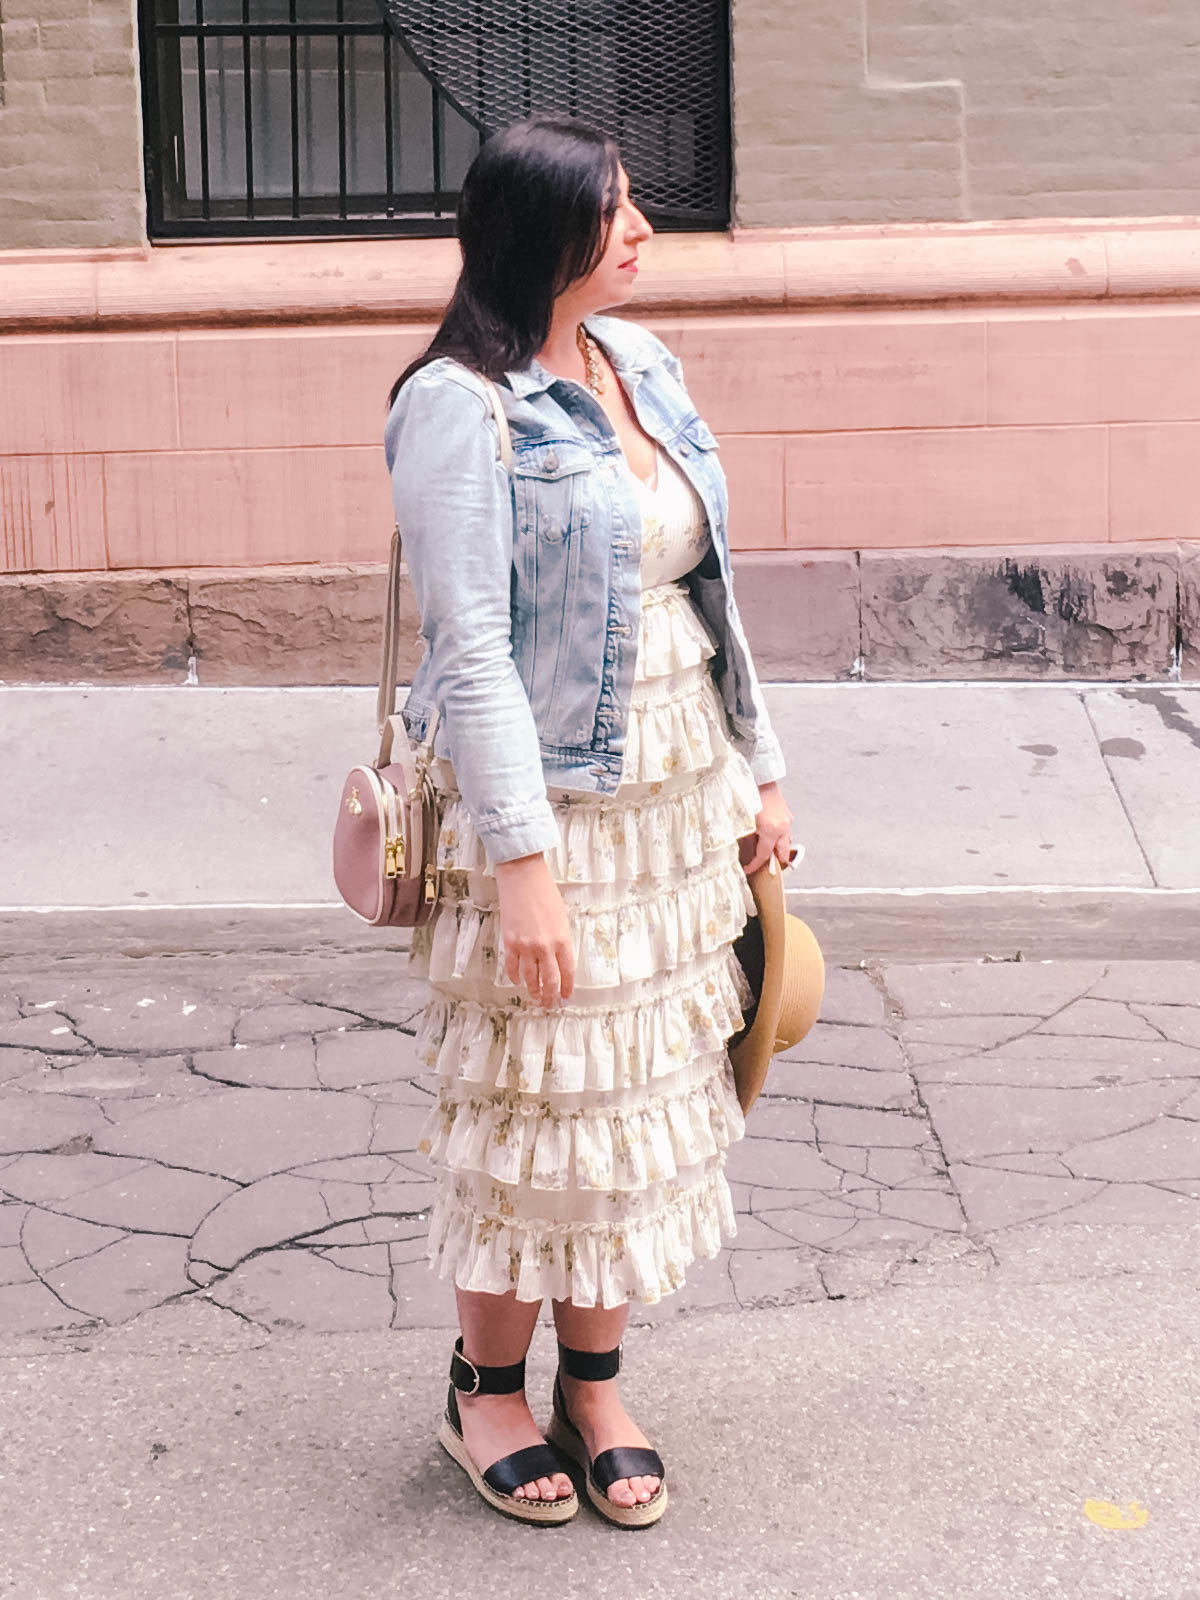 OOTD: Romance is back :: Romantic Dress Options for Spring and Summer featuring the Wayf Darlene Tiered Ruffle Dress :: Effortlessly with Roxy